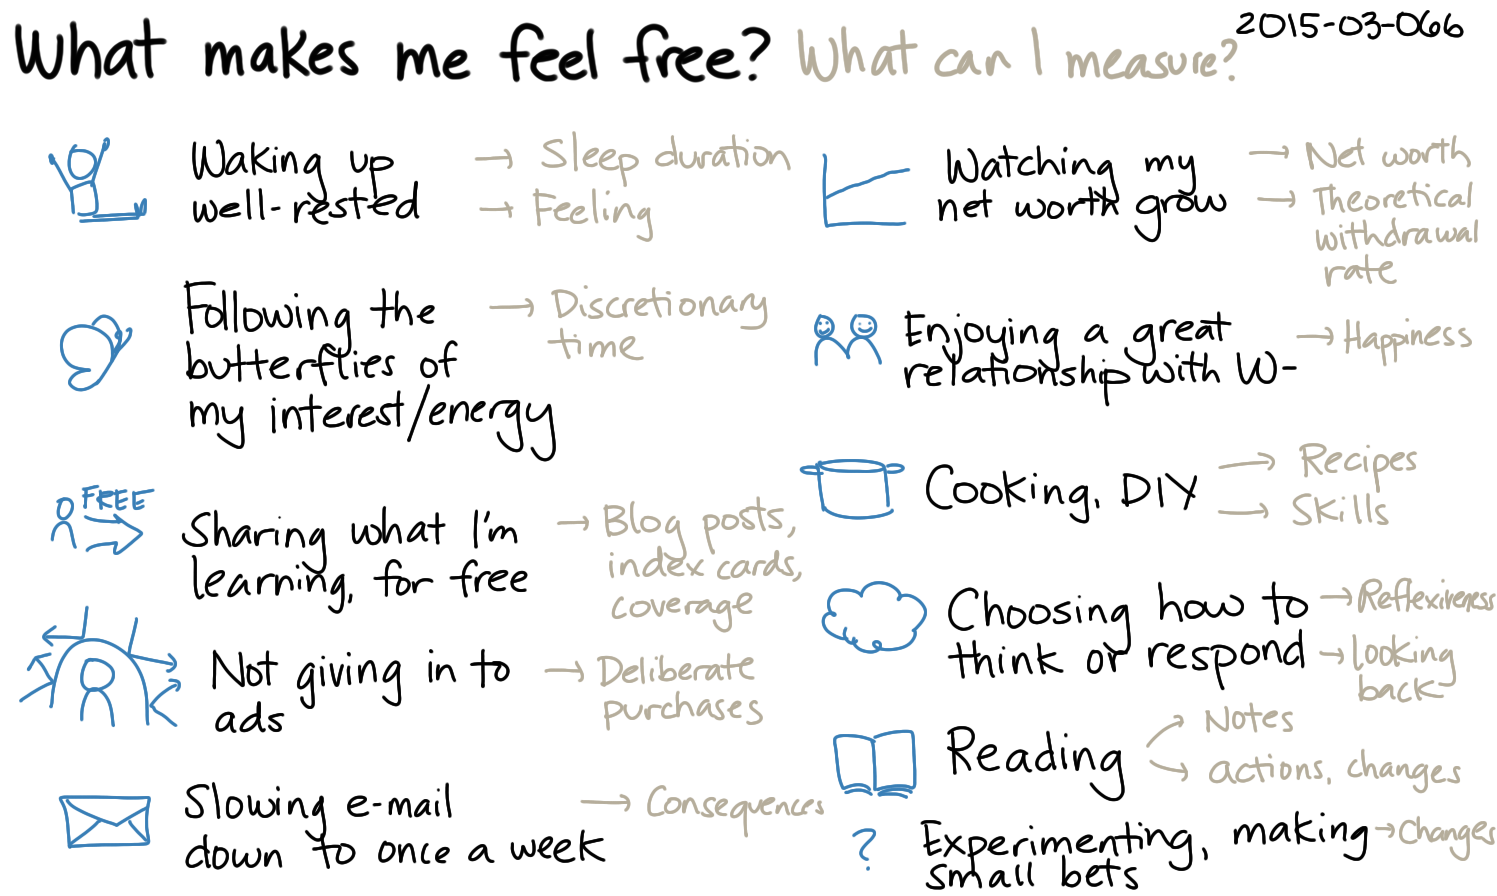 2015-03-06b What makes me feel free - What can I measure -- index card #quantified #freedom #independence #feeling